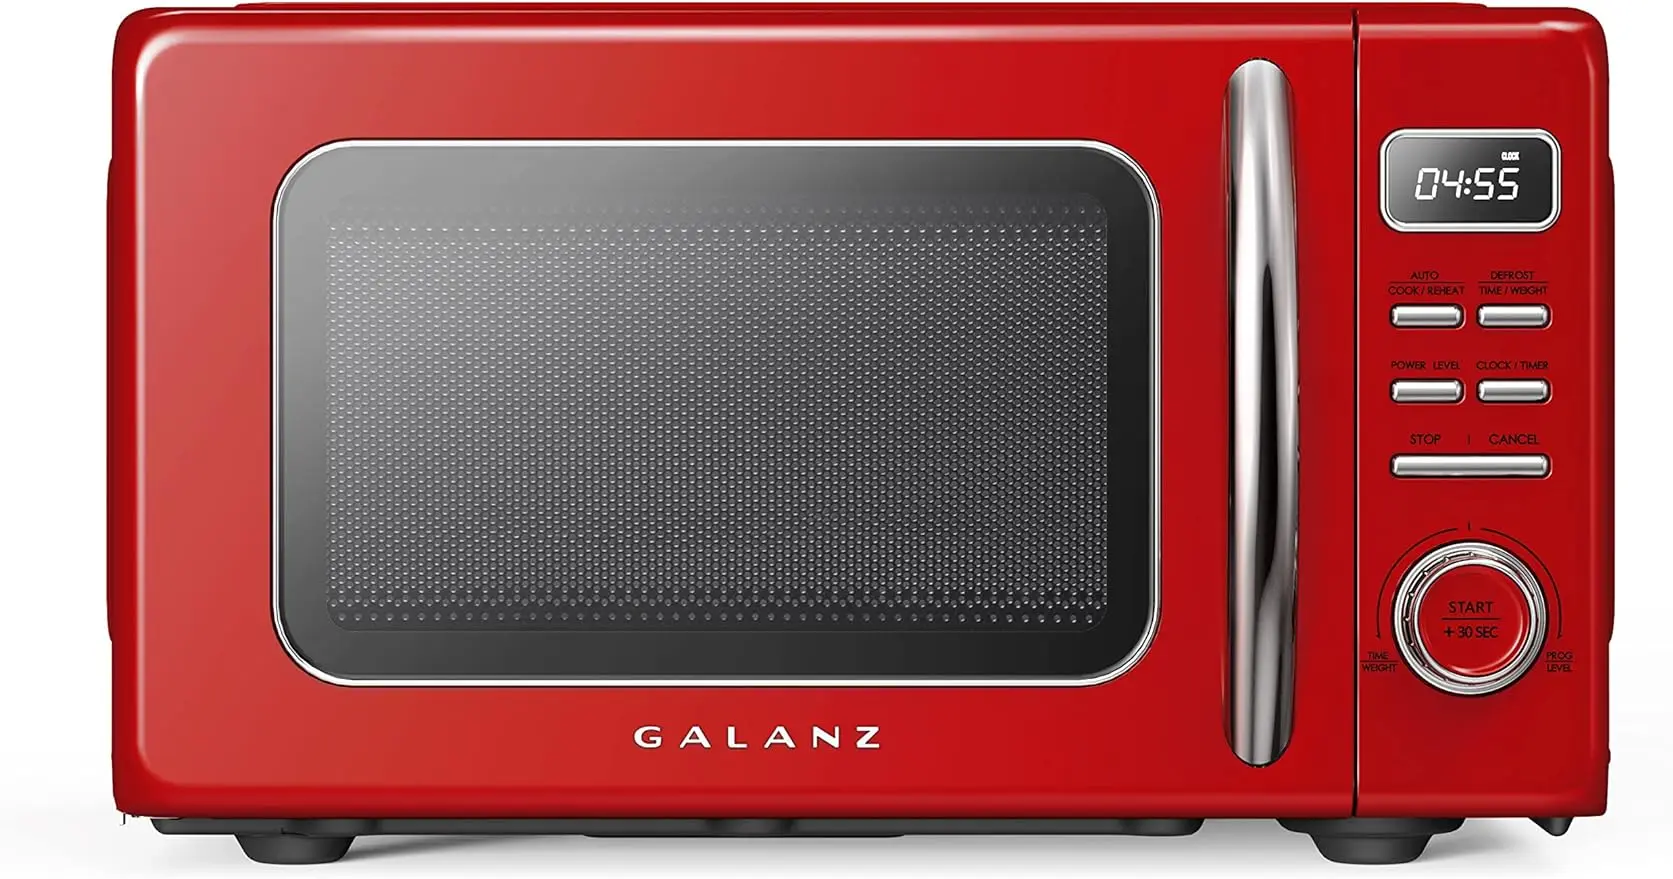 

Galanz GLCMKZ07RDR07 Retro Countertop Microwave Oven with Auto Cook & Reheat, Defrost, Quick Start Functions, Easy Clean Red